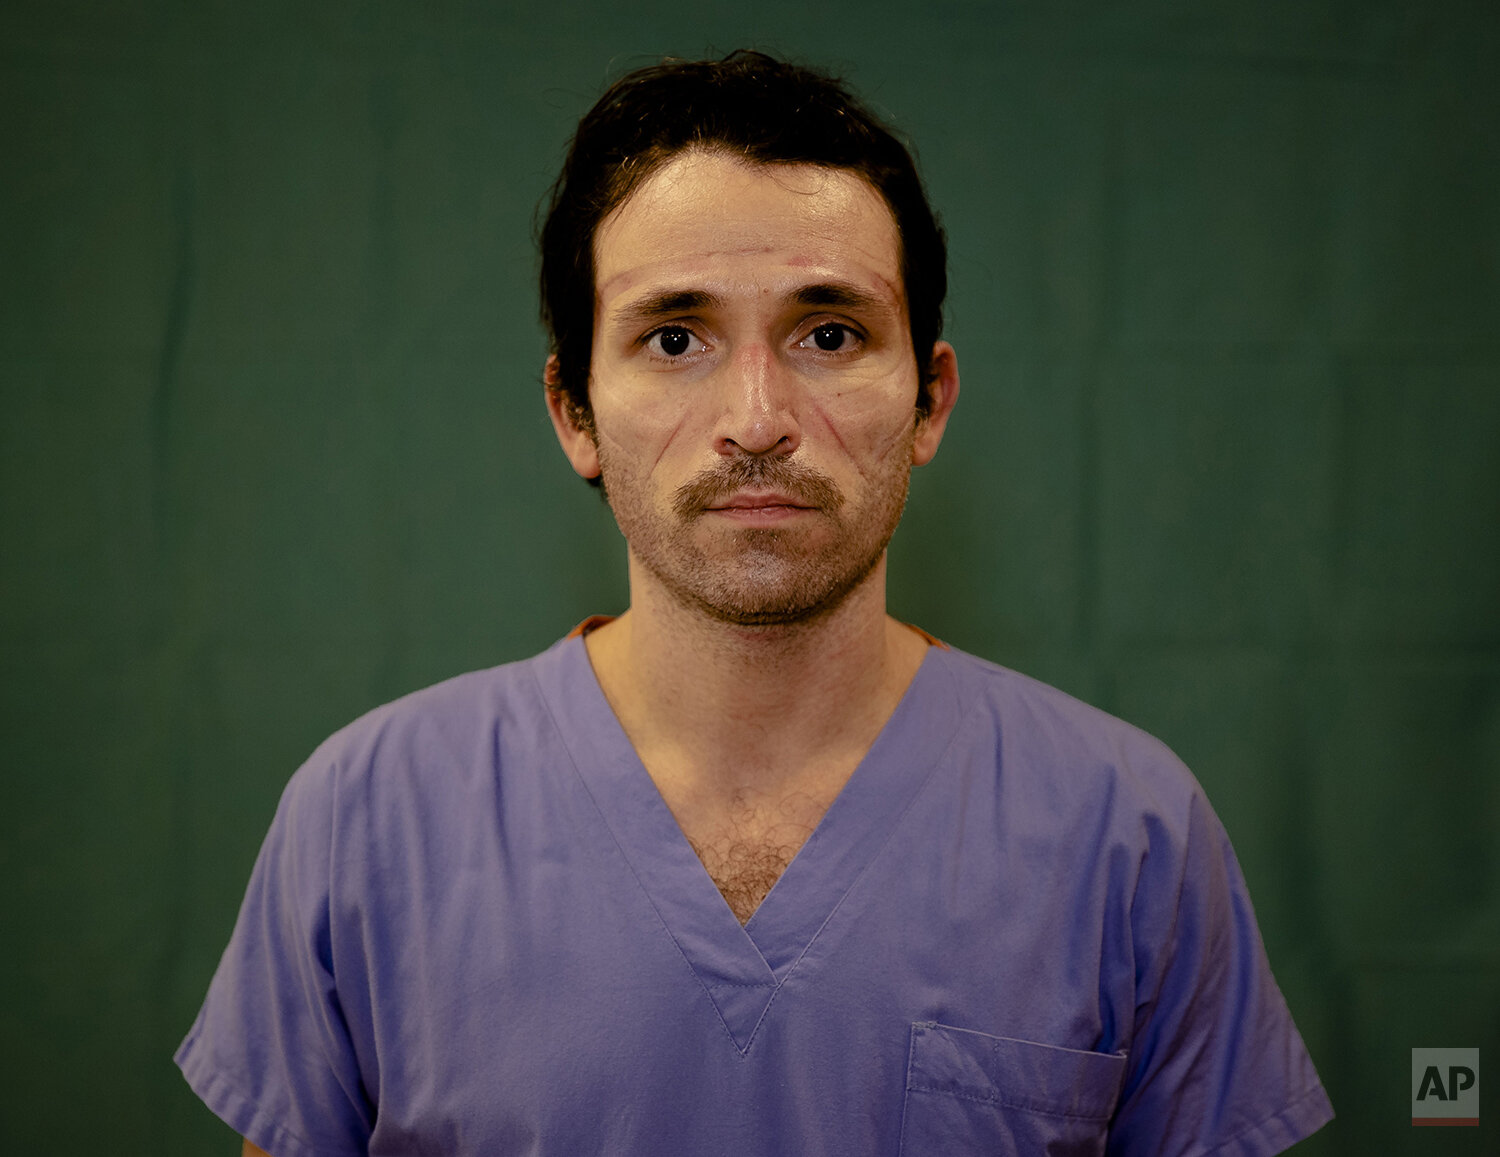  Doctor Luca Tarantino, 37, an electrophysiologist at the Humanitas Gavazzeni Hospital in Bergamo, Italy poses for a portrait at the end of his shift Friday, March 27, 2020. The intensive care doctors and nurses on the front lines of the coronavirus 